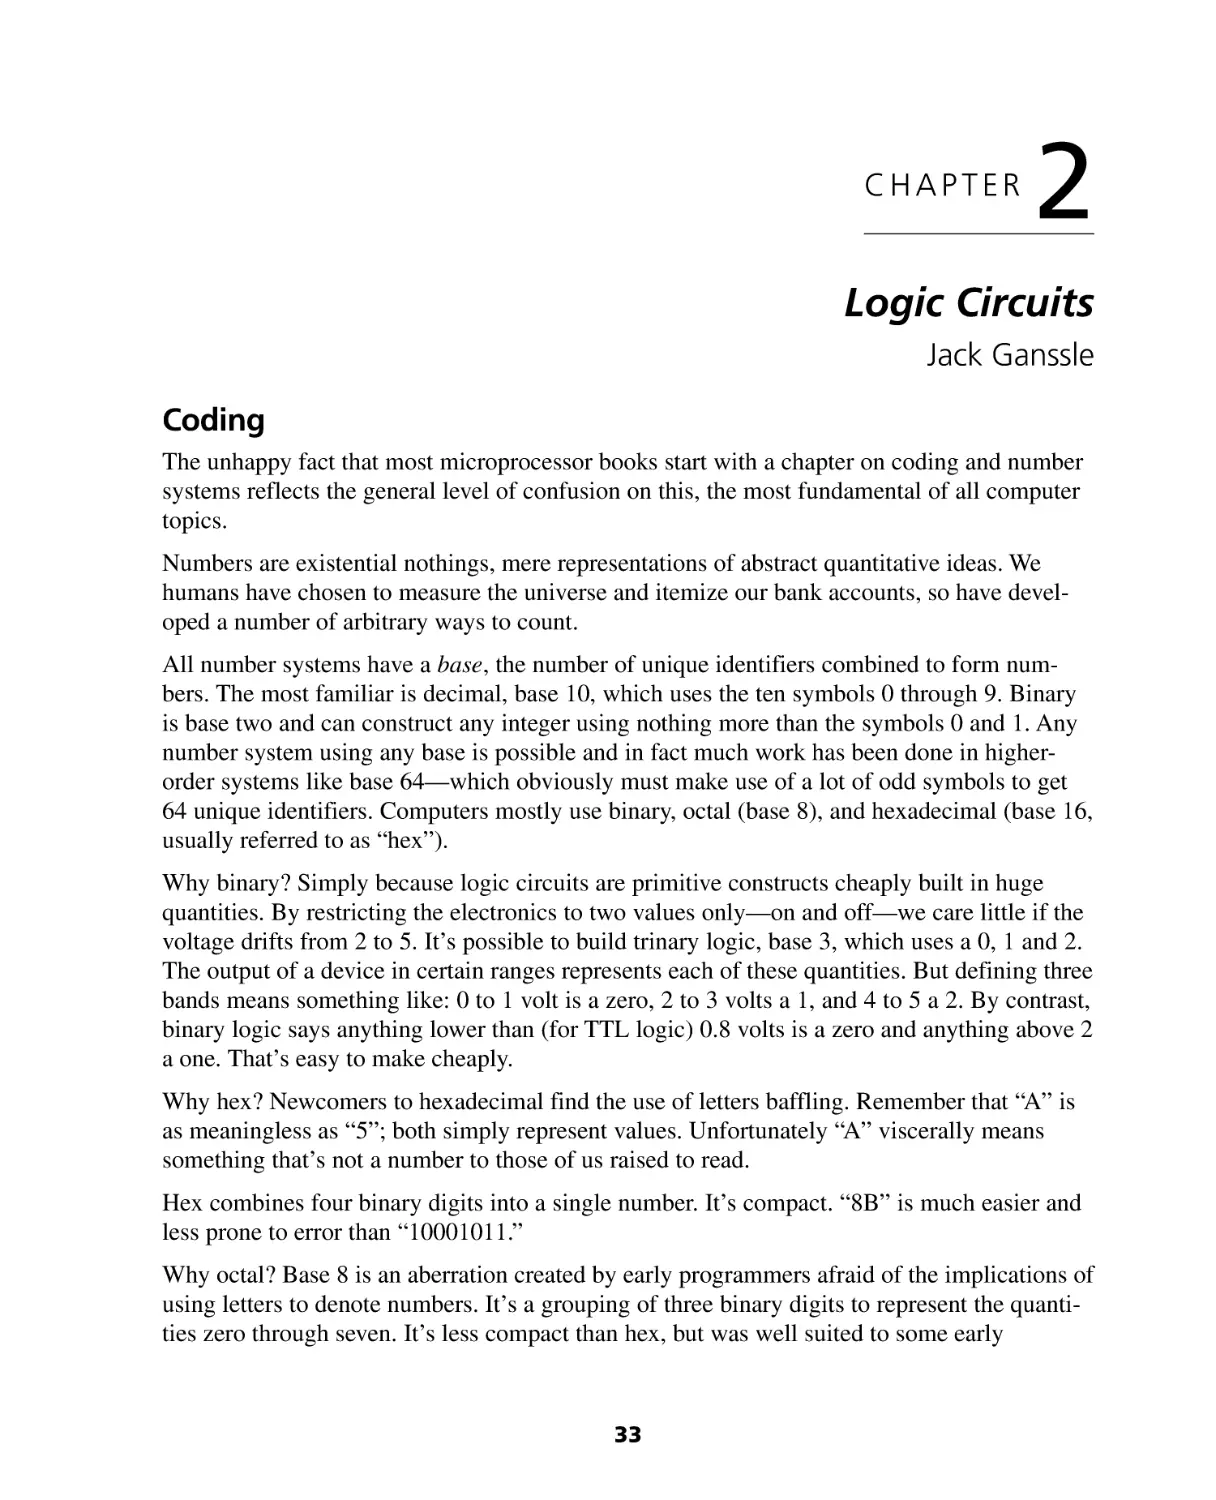 Chapter 2
Coding